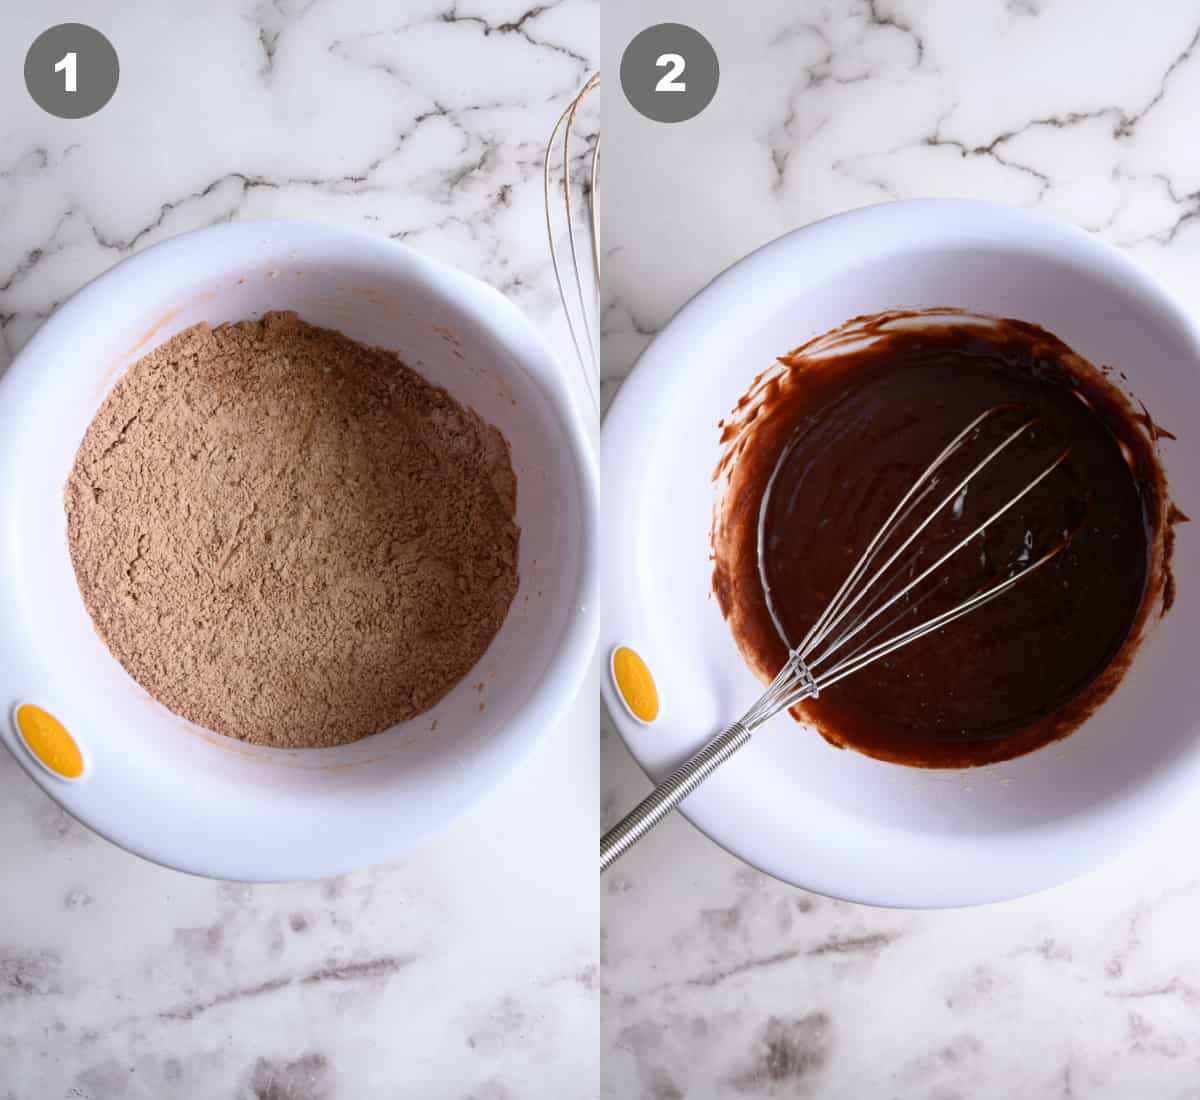 A bowl of the dry ingredients and another bowl of melted chocolate.